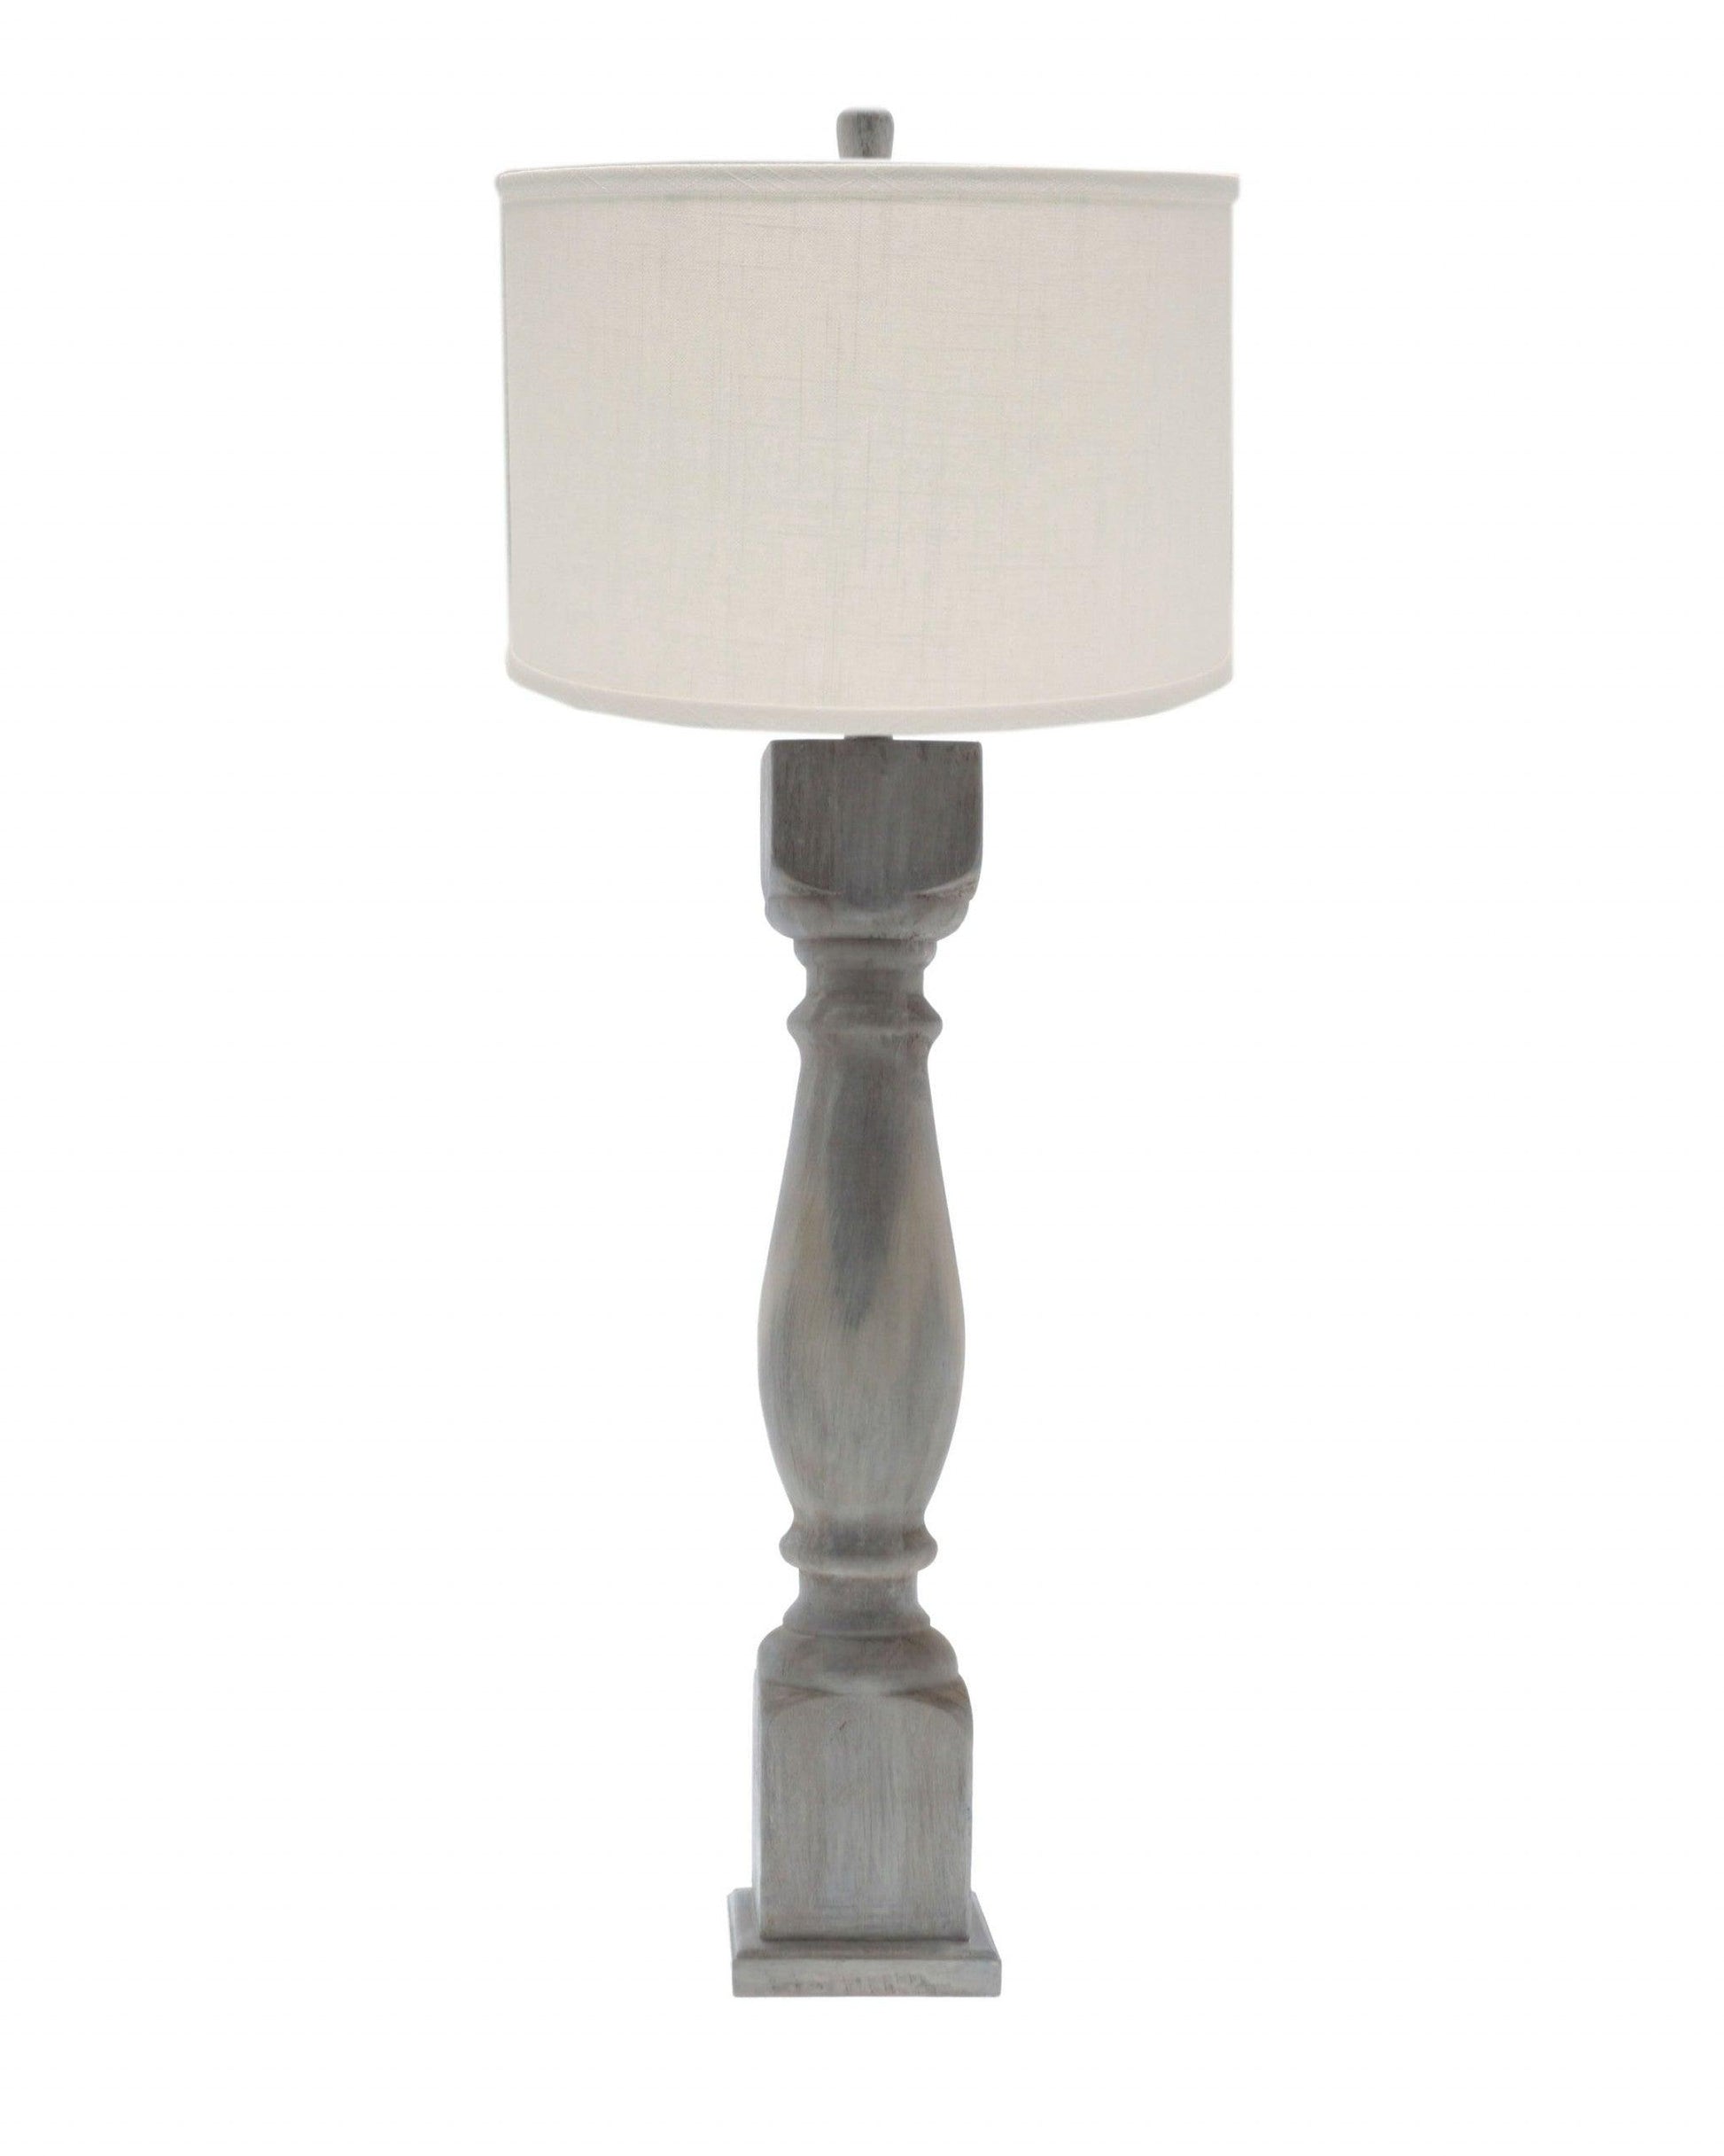 Brown Washed Wood Finish Table Lamp with Ivory Linen Shade - AFS